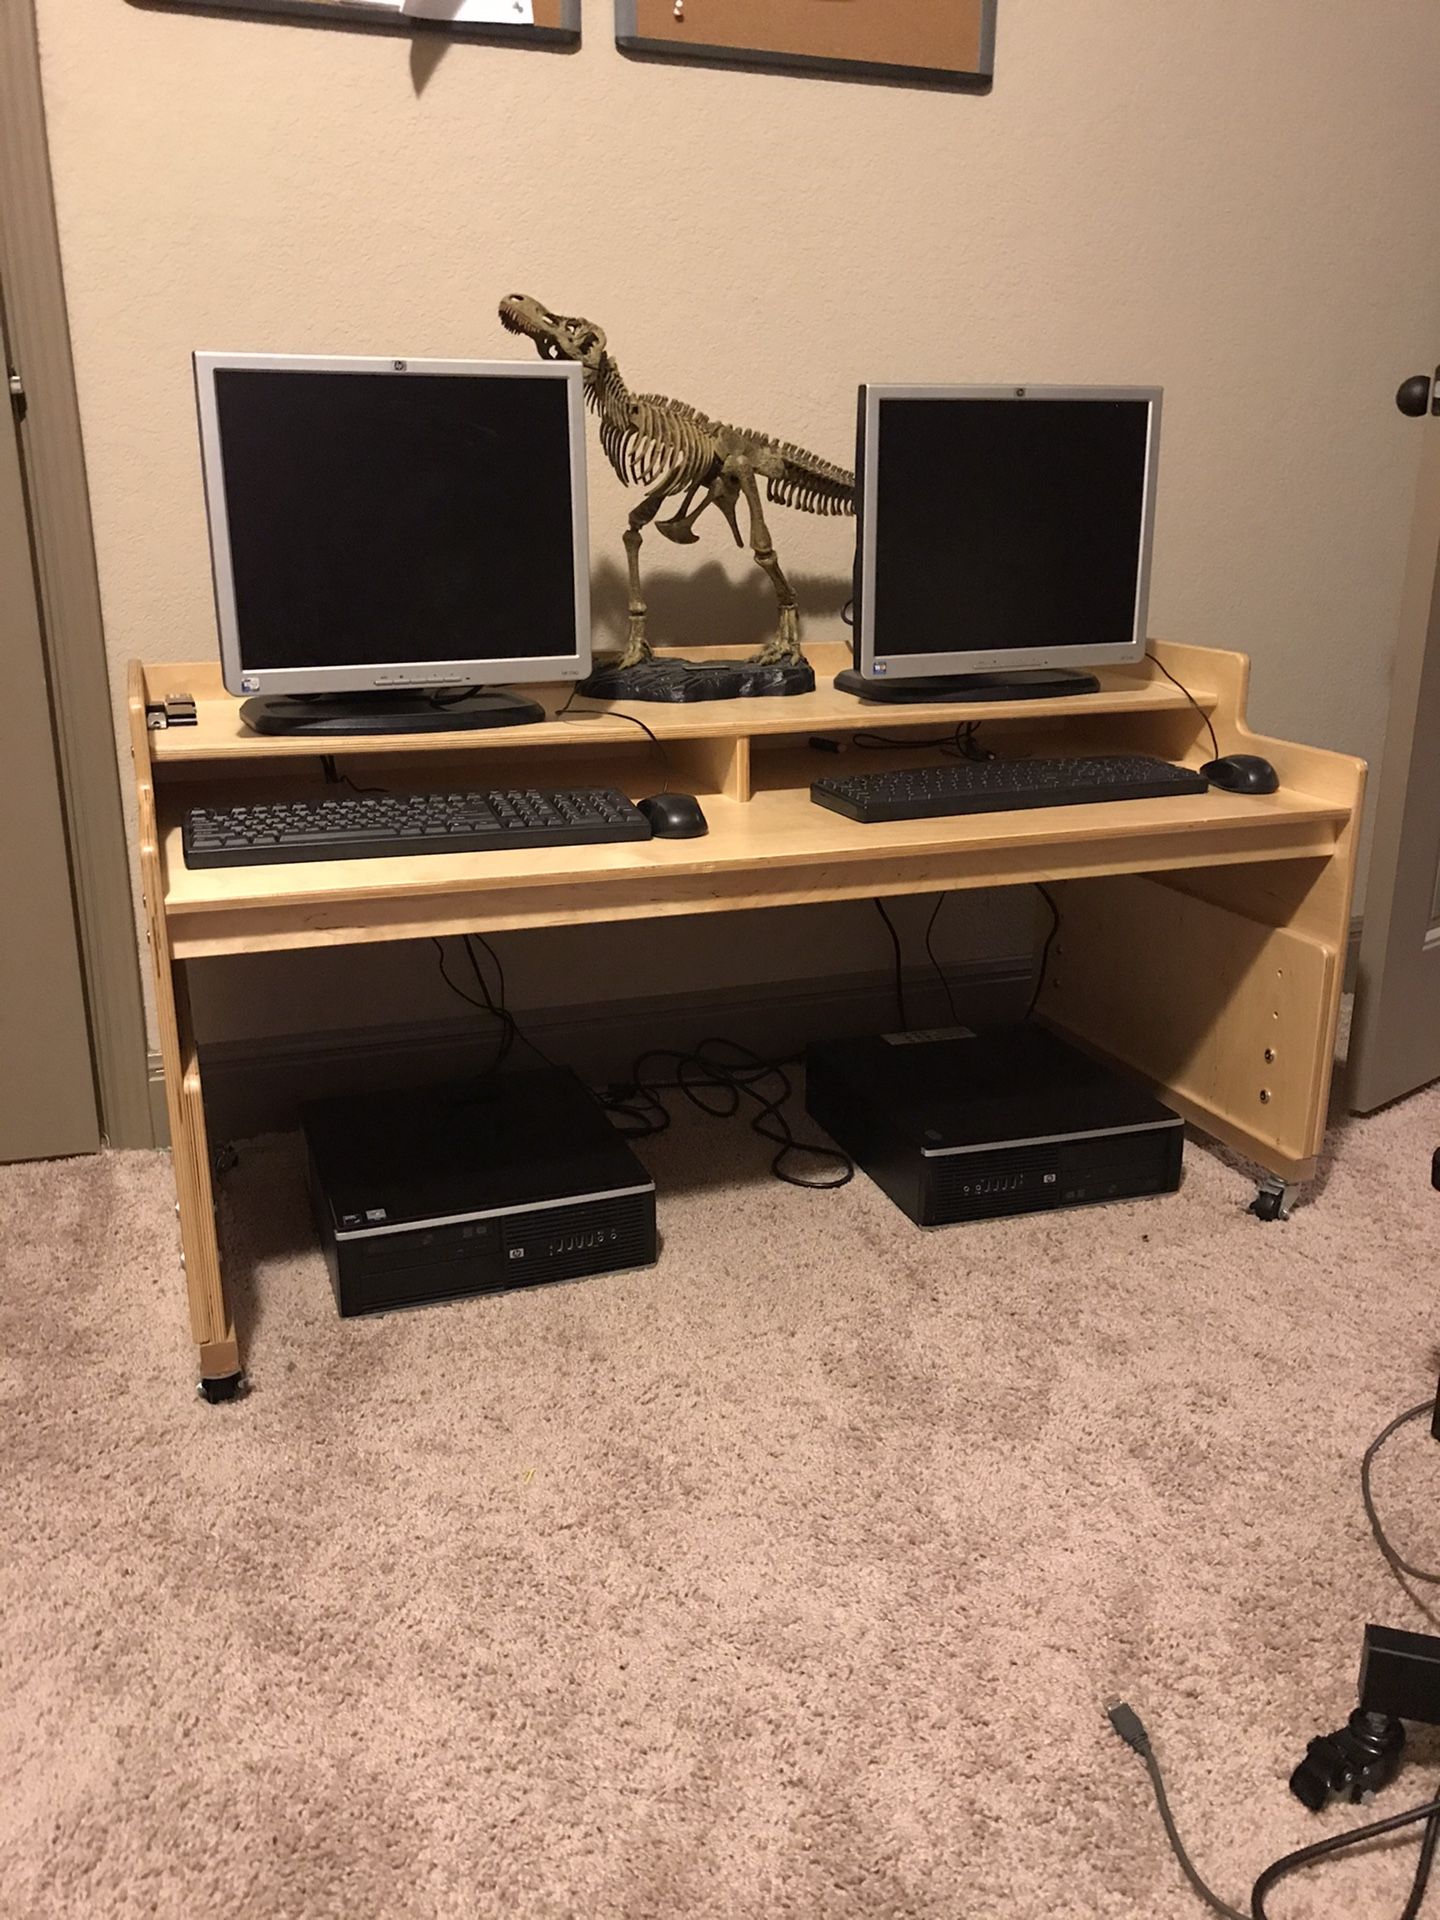 Two HP computers with flat screen monitors